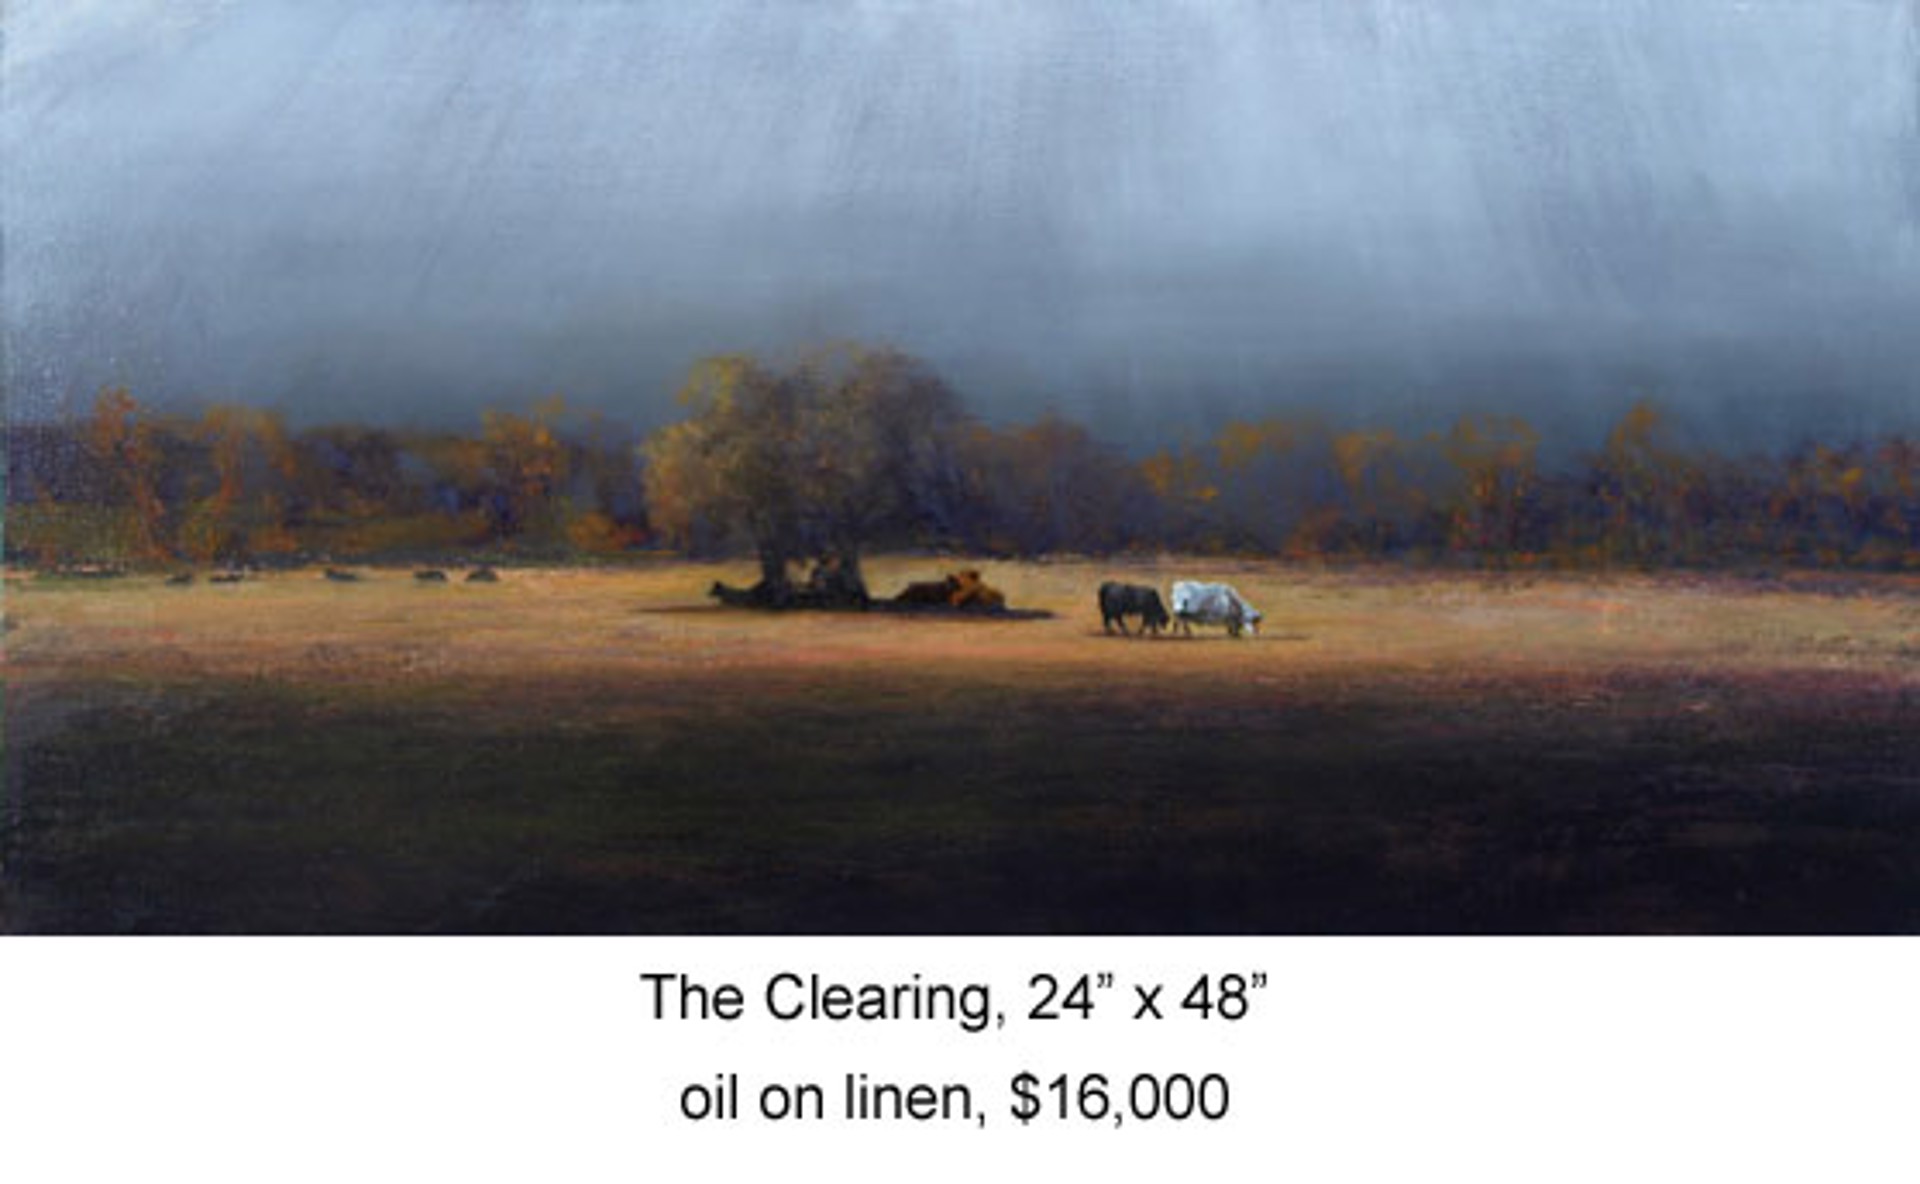 The Clearing by William Berra